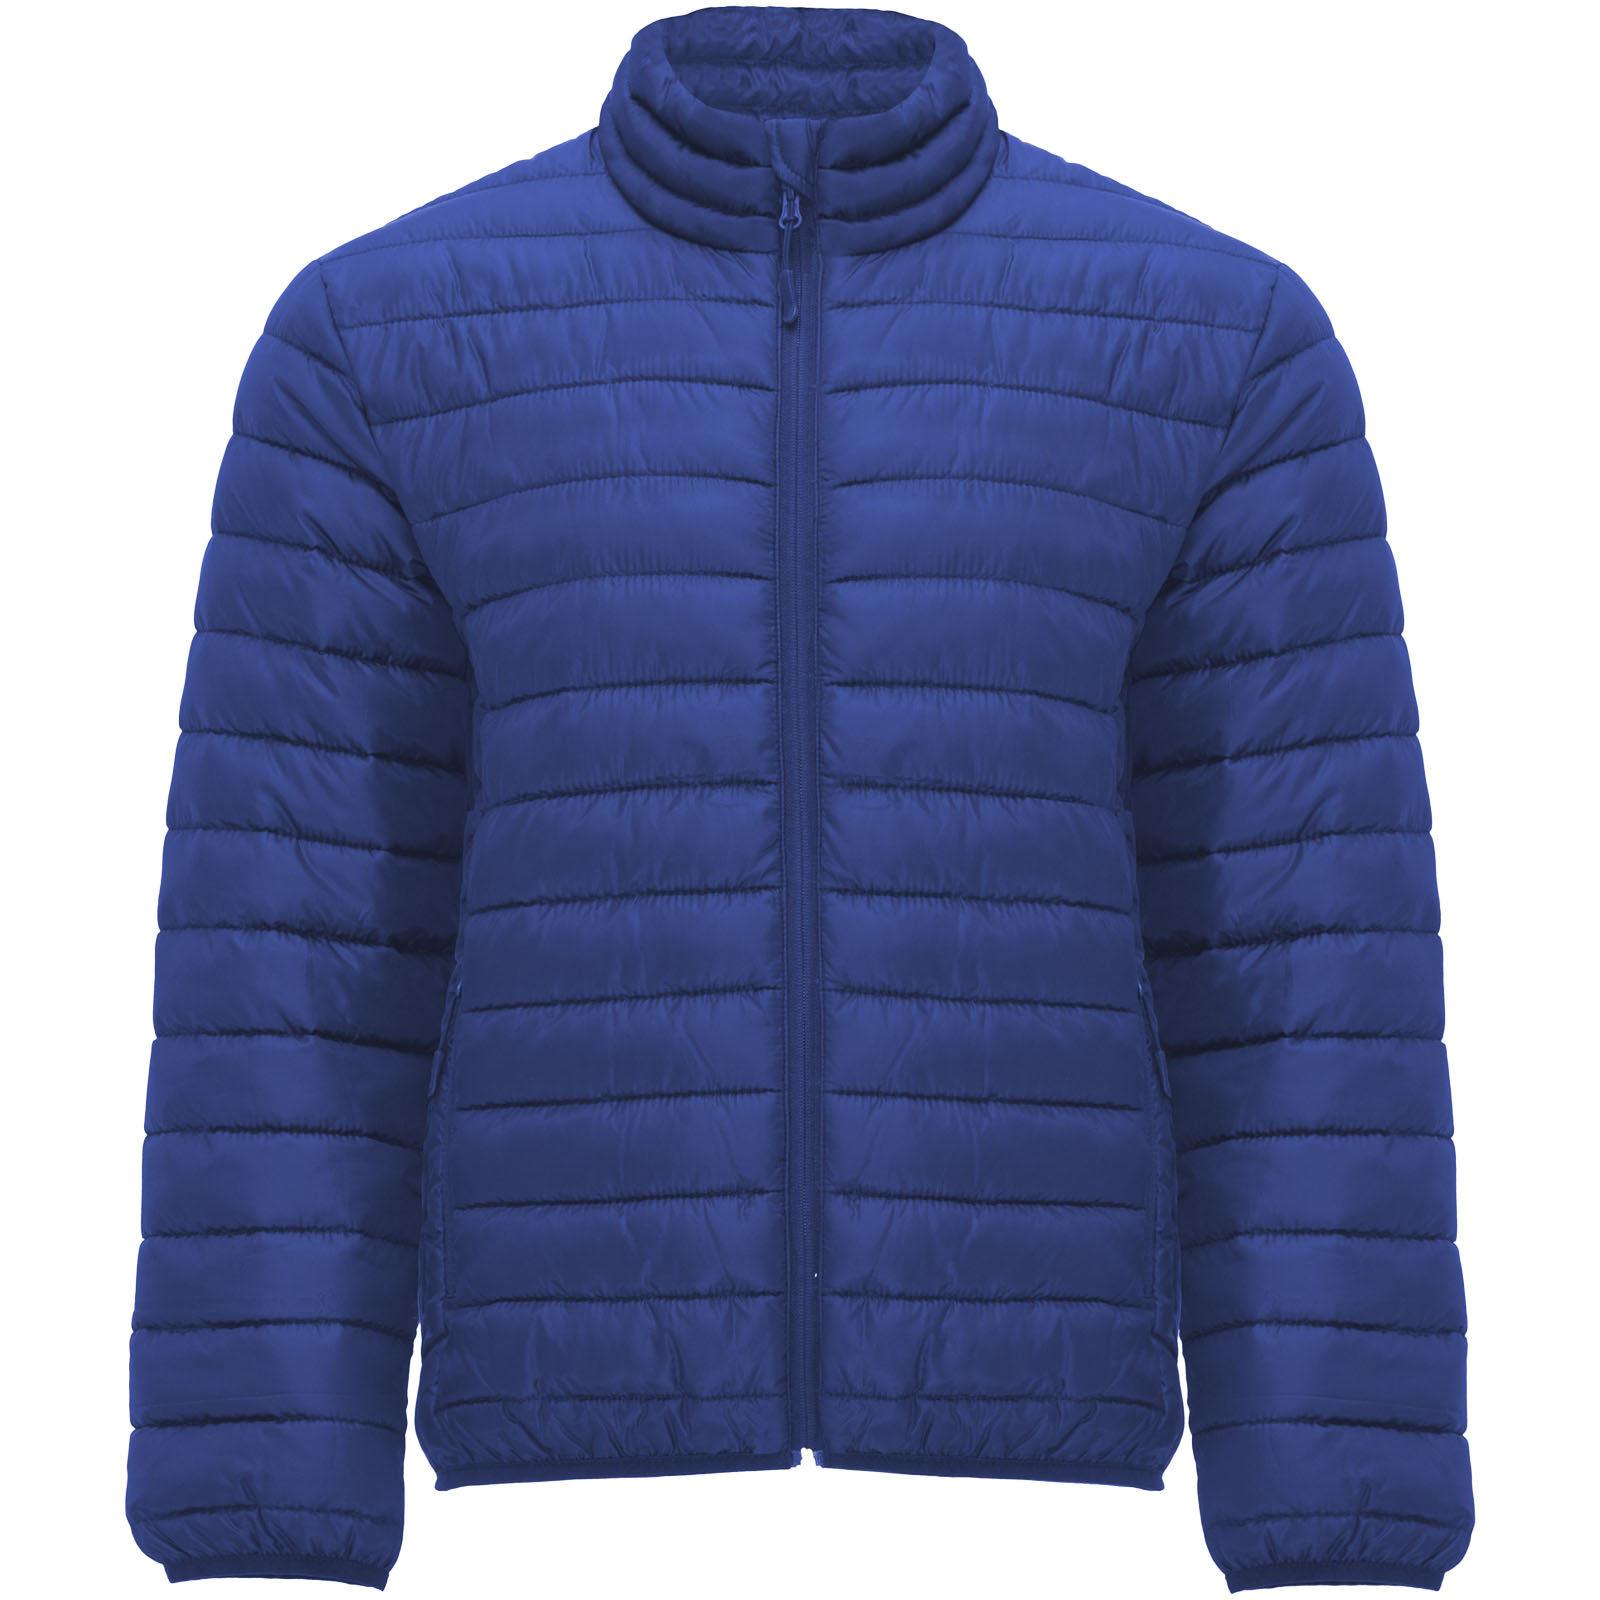 Advertising Jackets - Finland men's insulated jacket